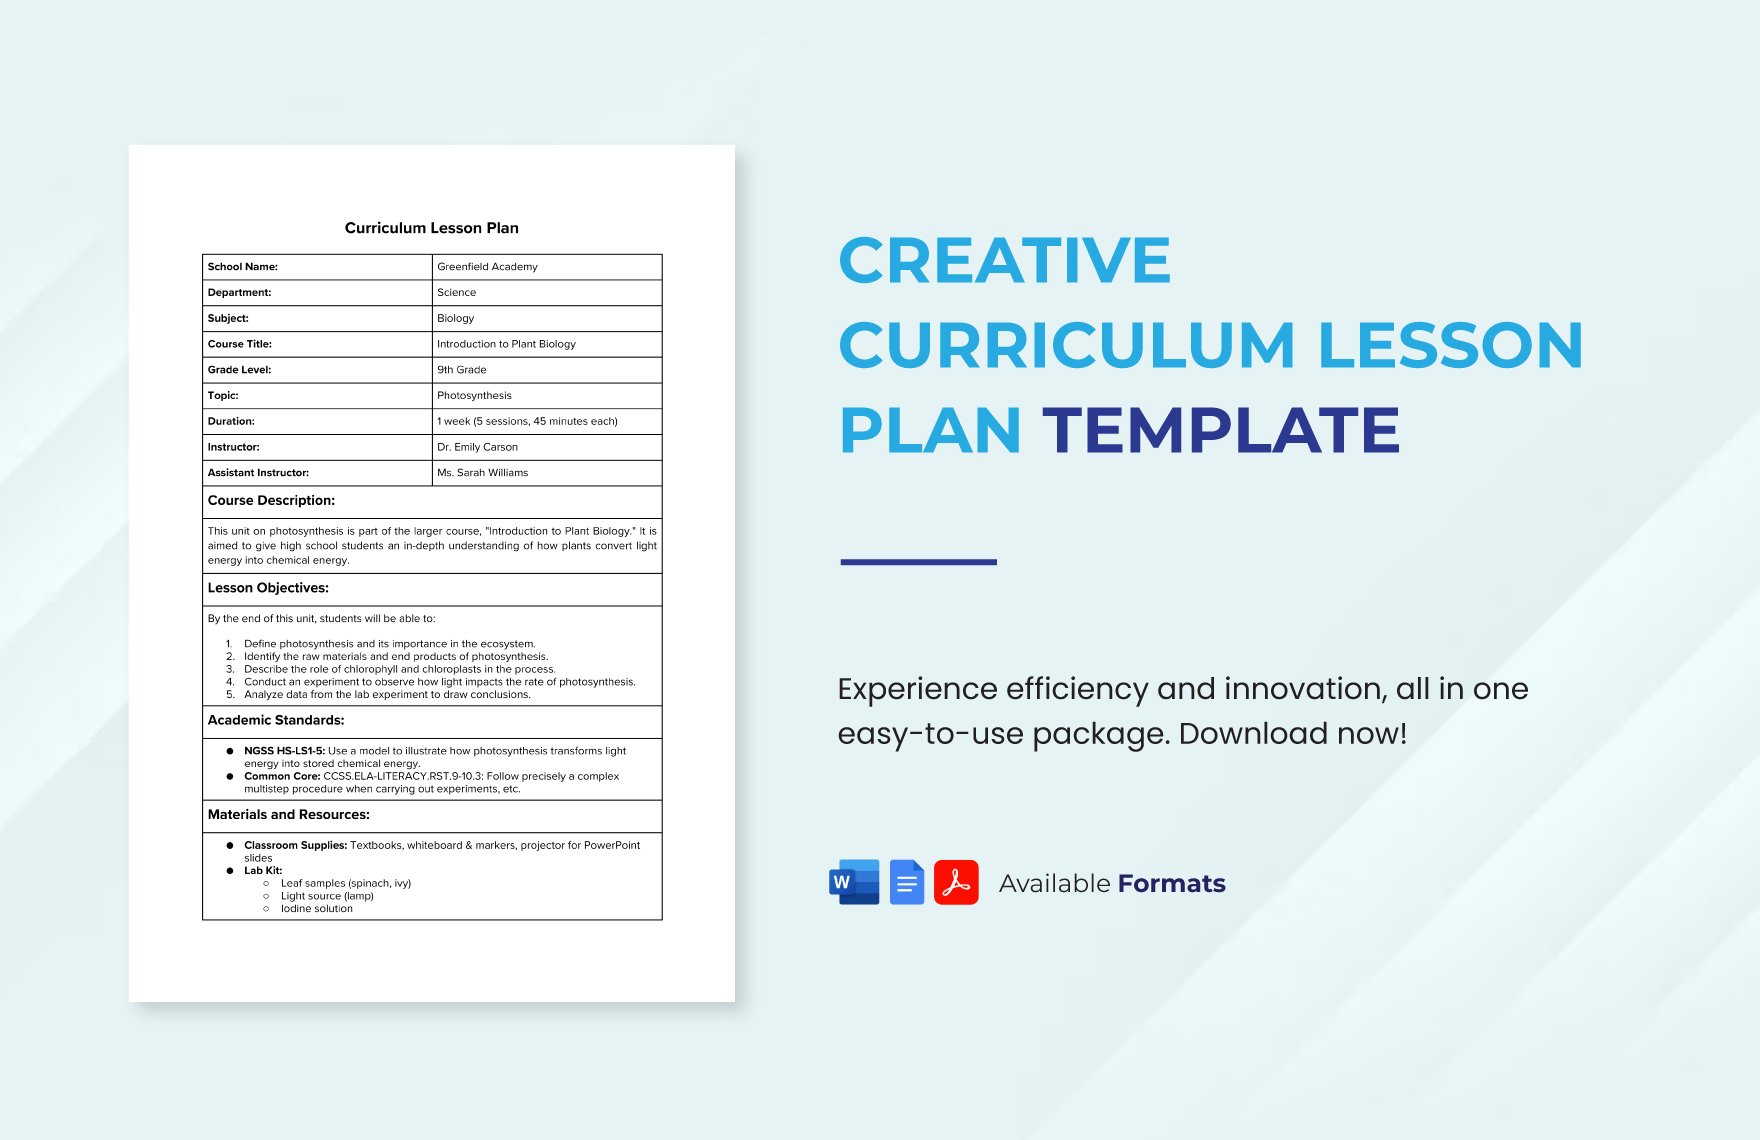 Free Creative Curriculum Lesson Plan Template in Word, Google Docs, PDF